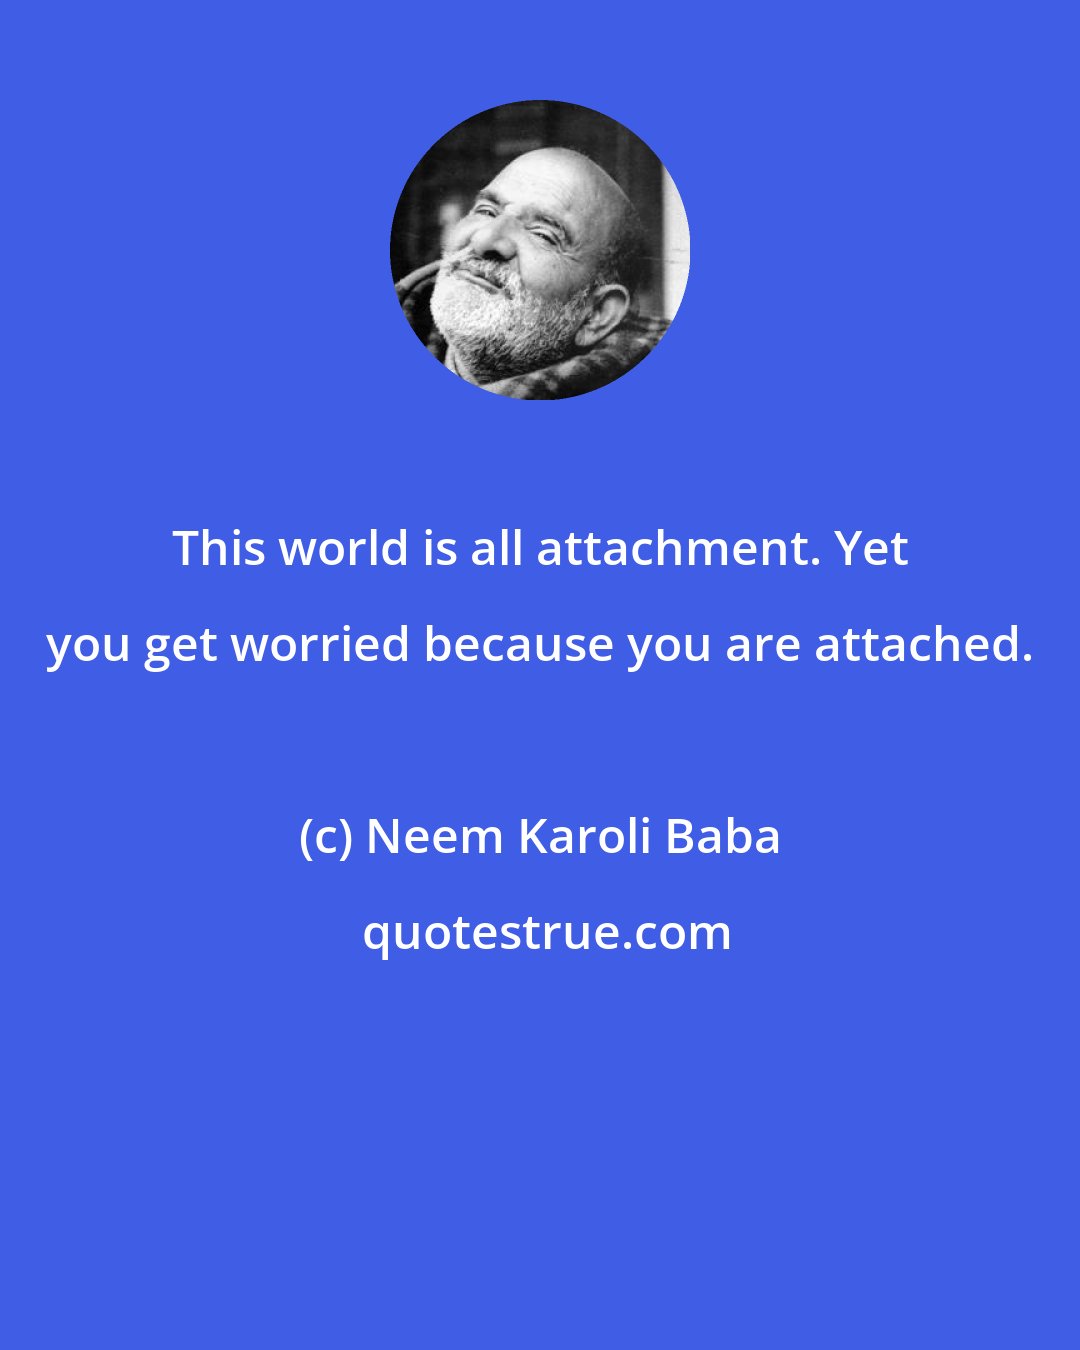 Neem Karoli Baba: This world is all attachment. Yet you get worried because you are attached.